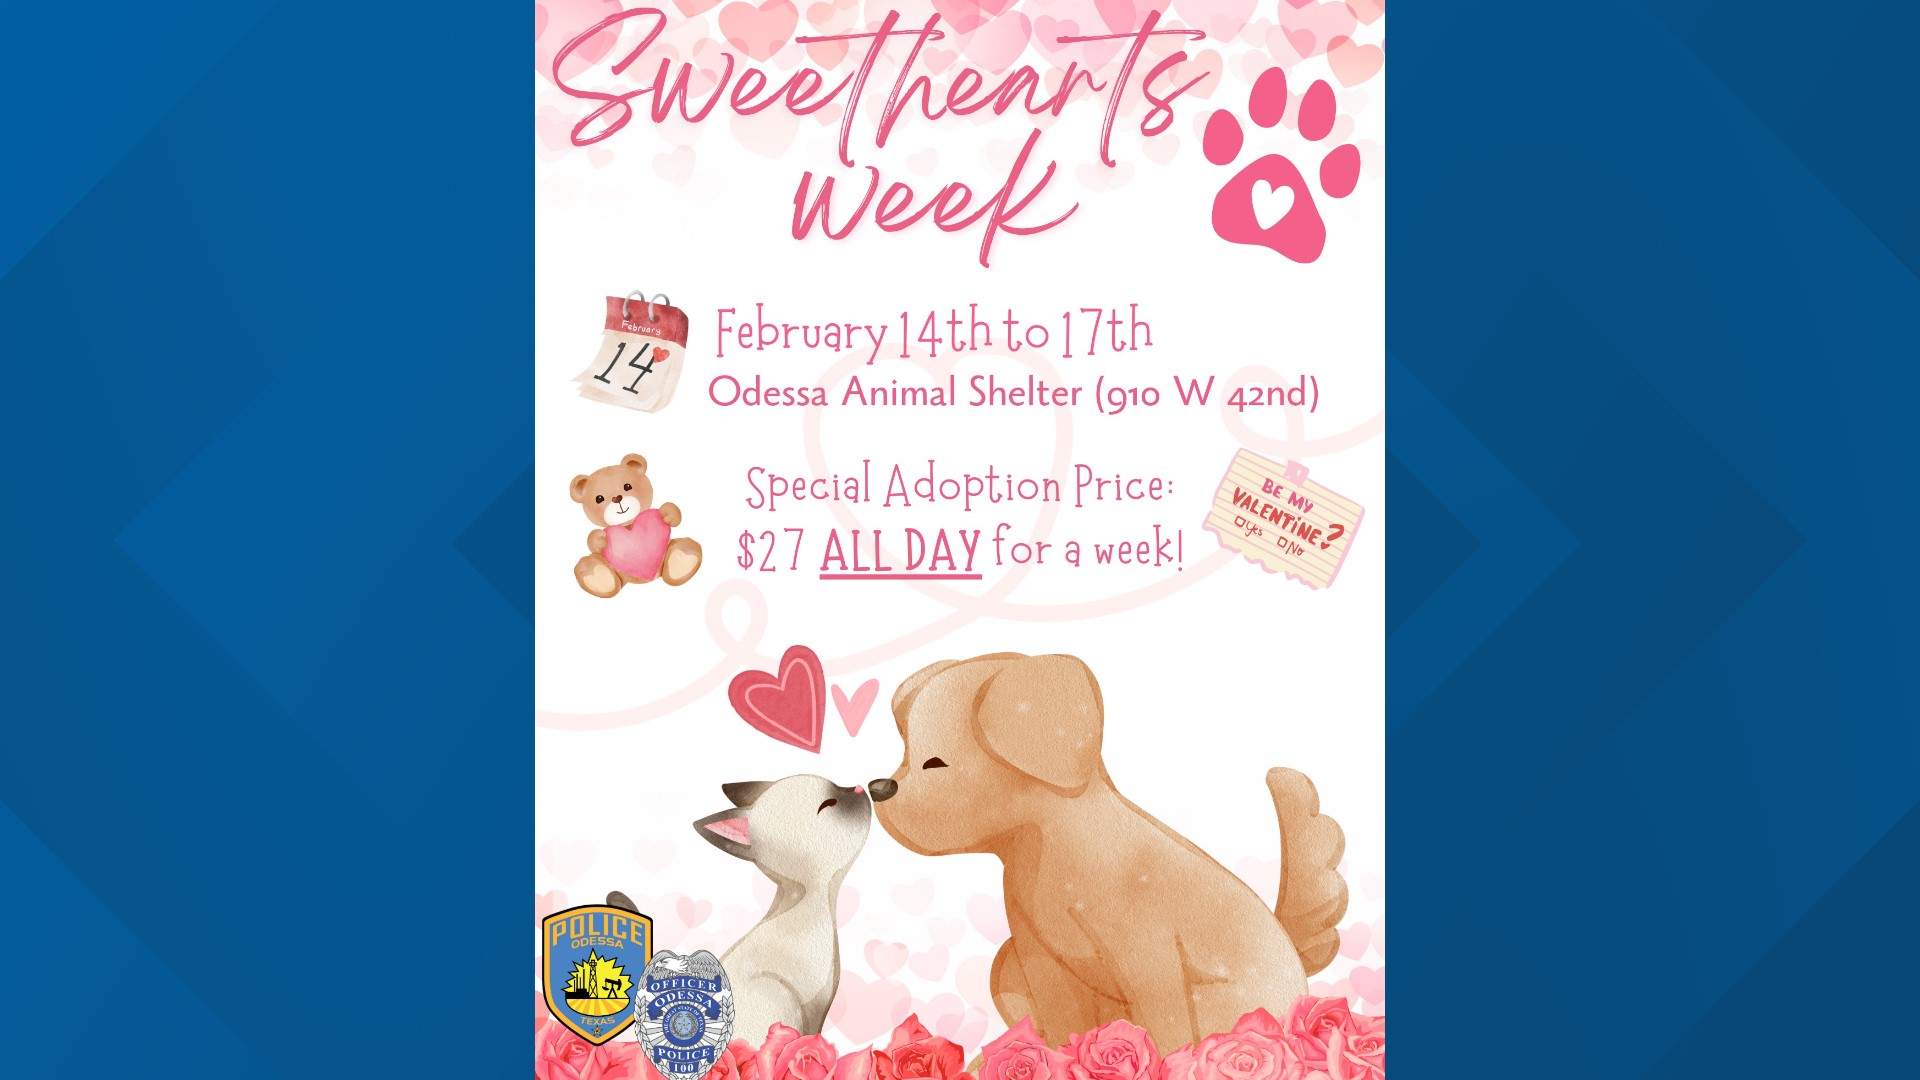 Odessa Animal Shelter to offer Valentine's Day Special from February 14-17  